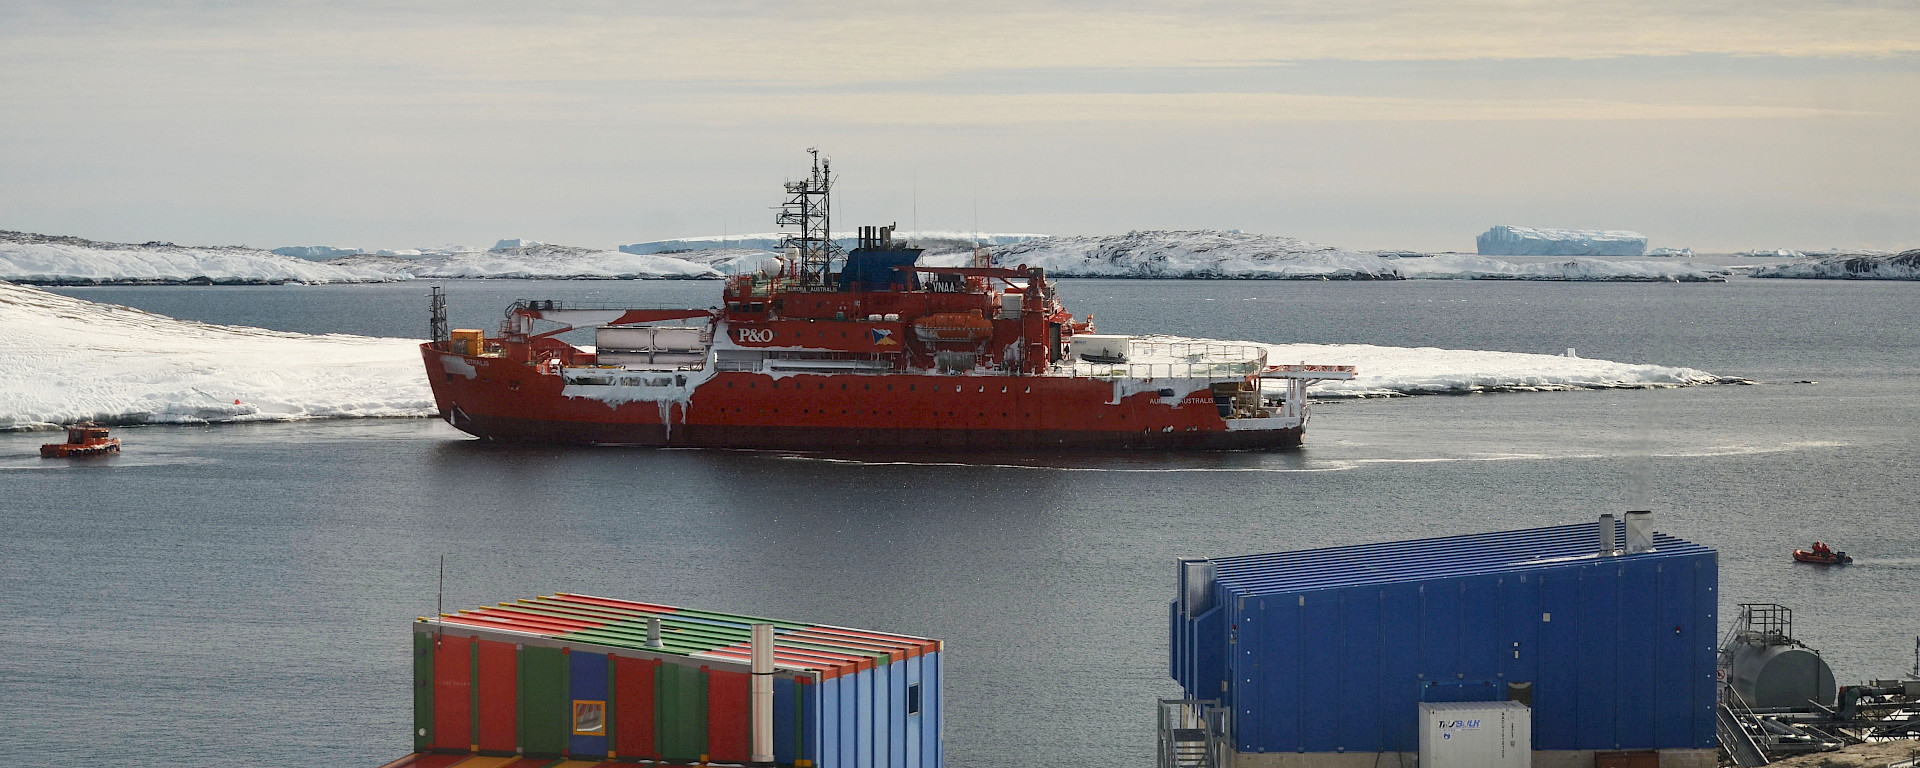 Aurora Australis after being refloated in Mawson harbour